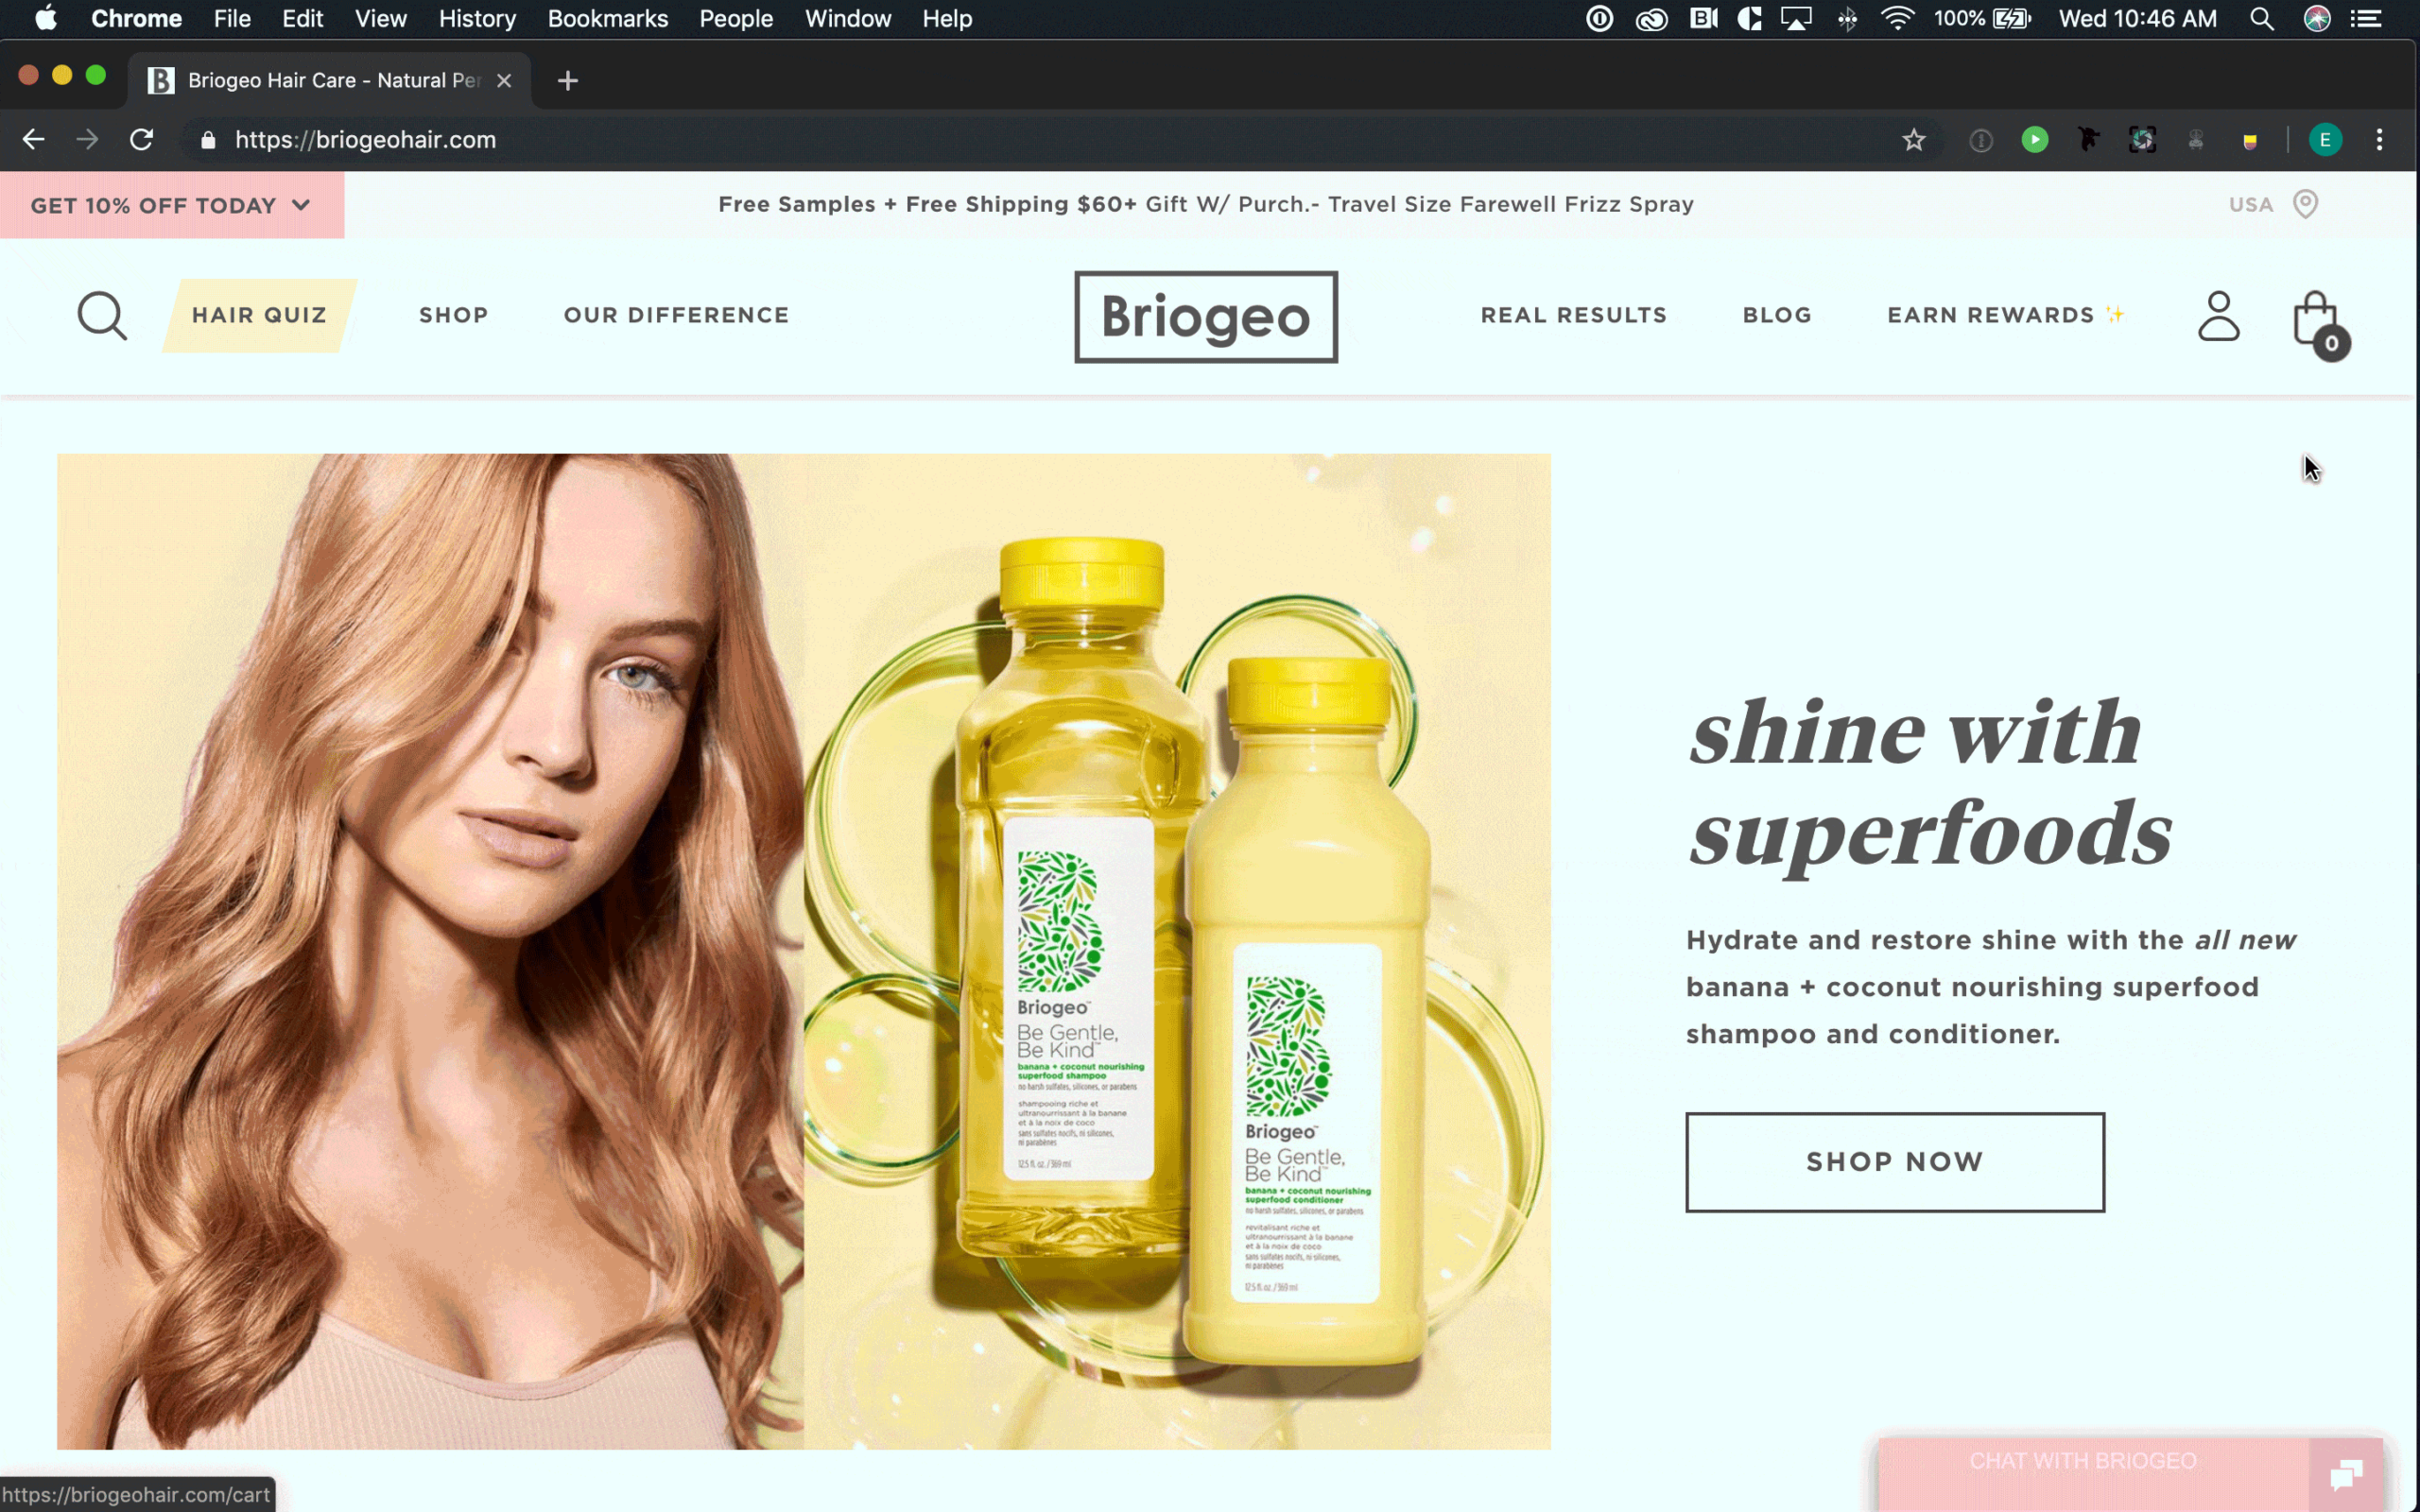 An animated GIF that shows how Briogeo's cart pops out on the right side of the screen instead of disrupting the shopping experience by navigating shoppers away from the product page.